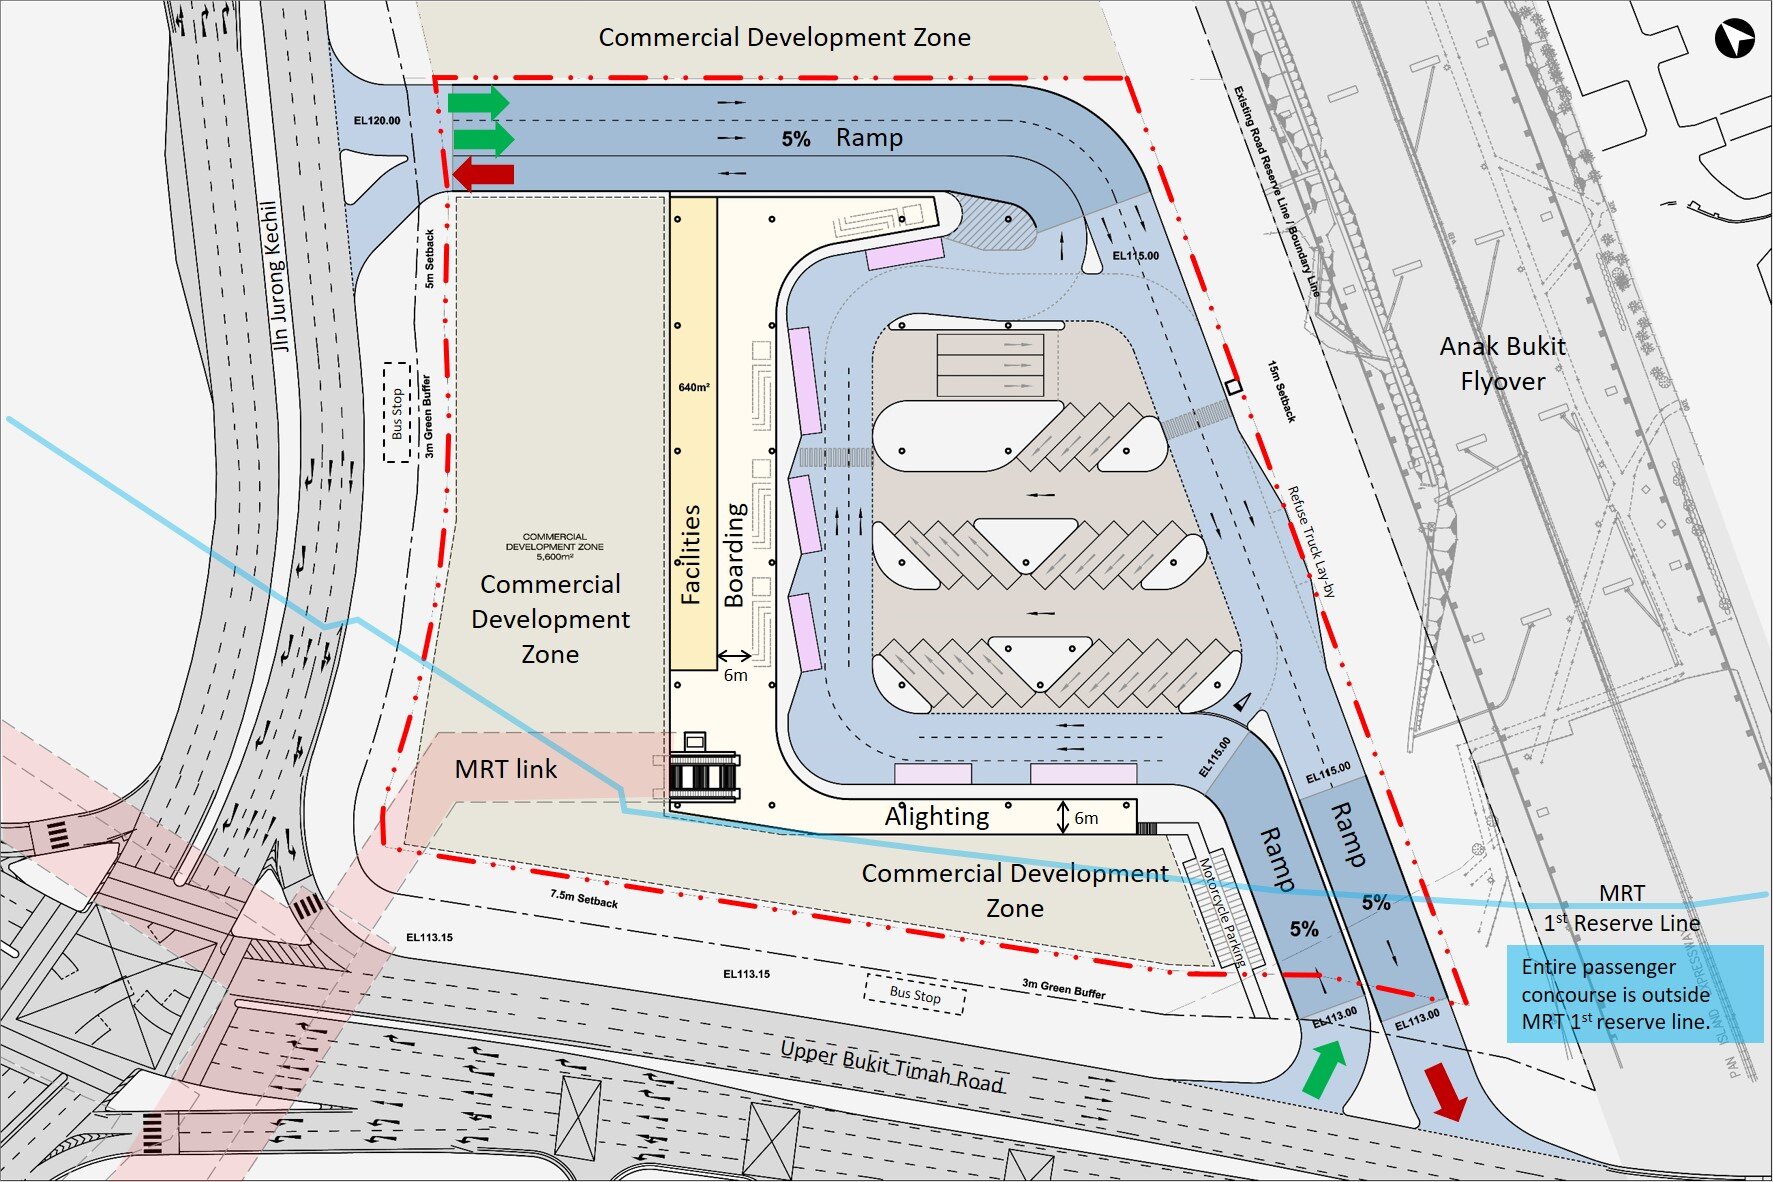 Site plan of one of the bus interchanges